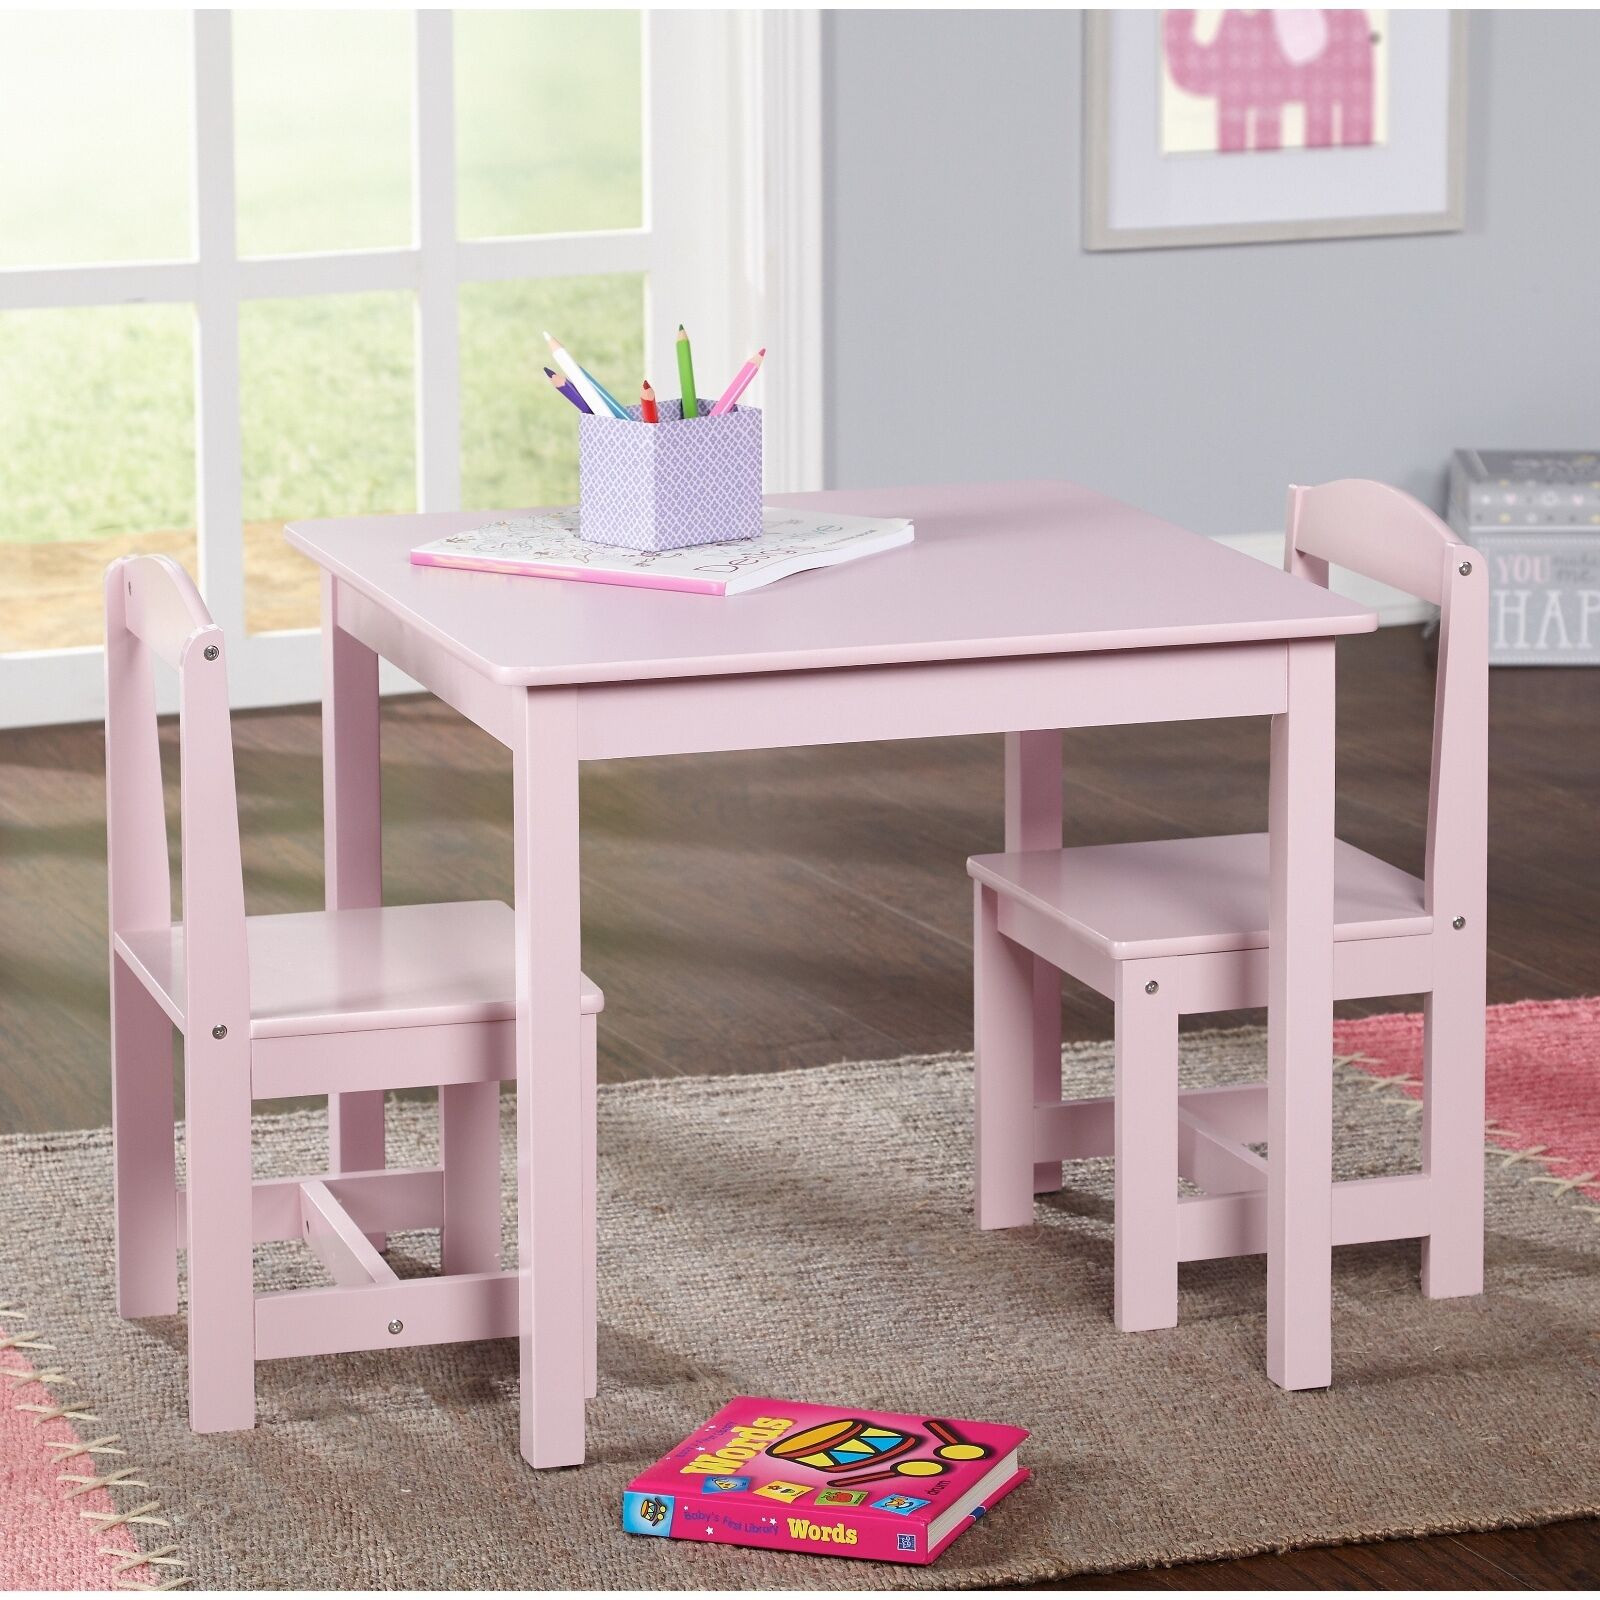 Kids Desk Table
 Study Small Table and Chair Set Generic 3 Piece Wood